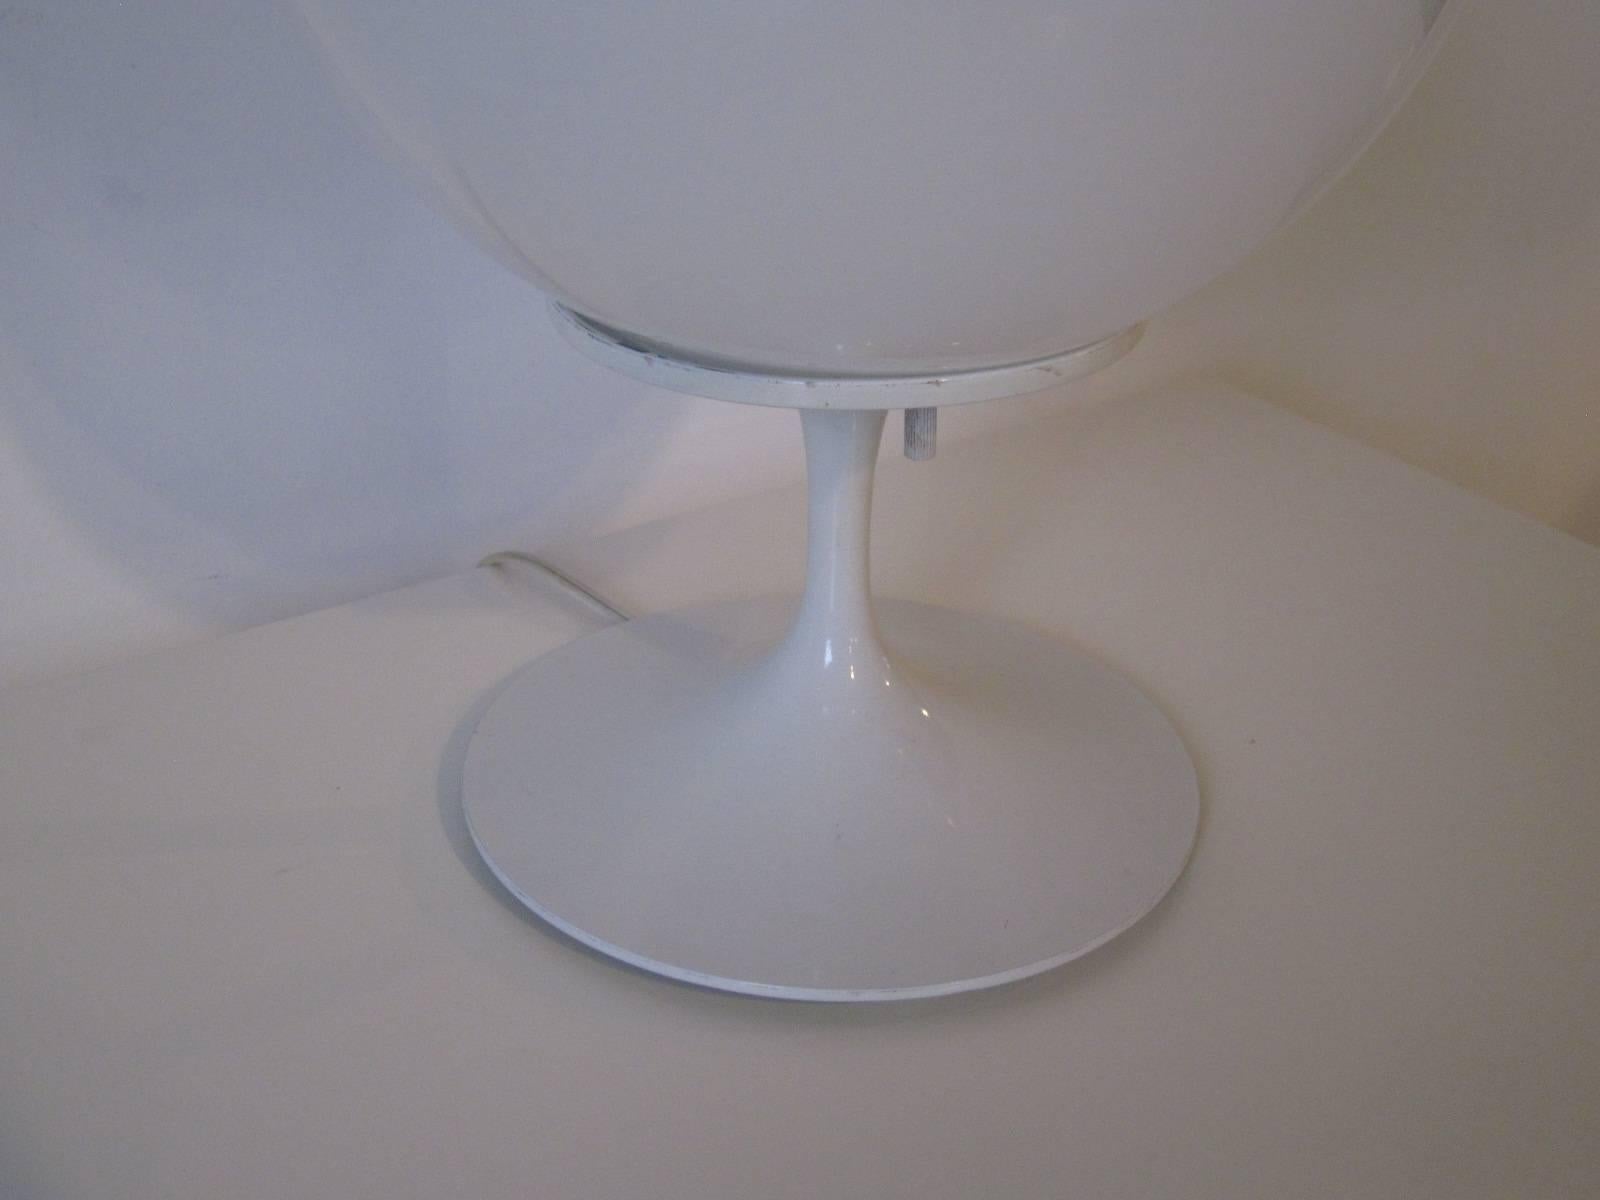 A white tulip table lamp with white round globe top manufactured by the Stemlite and Design Line Company.